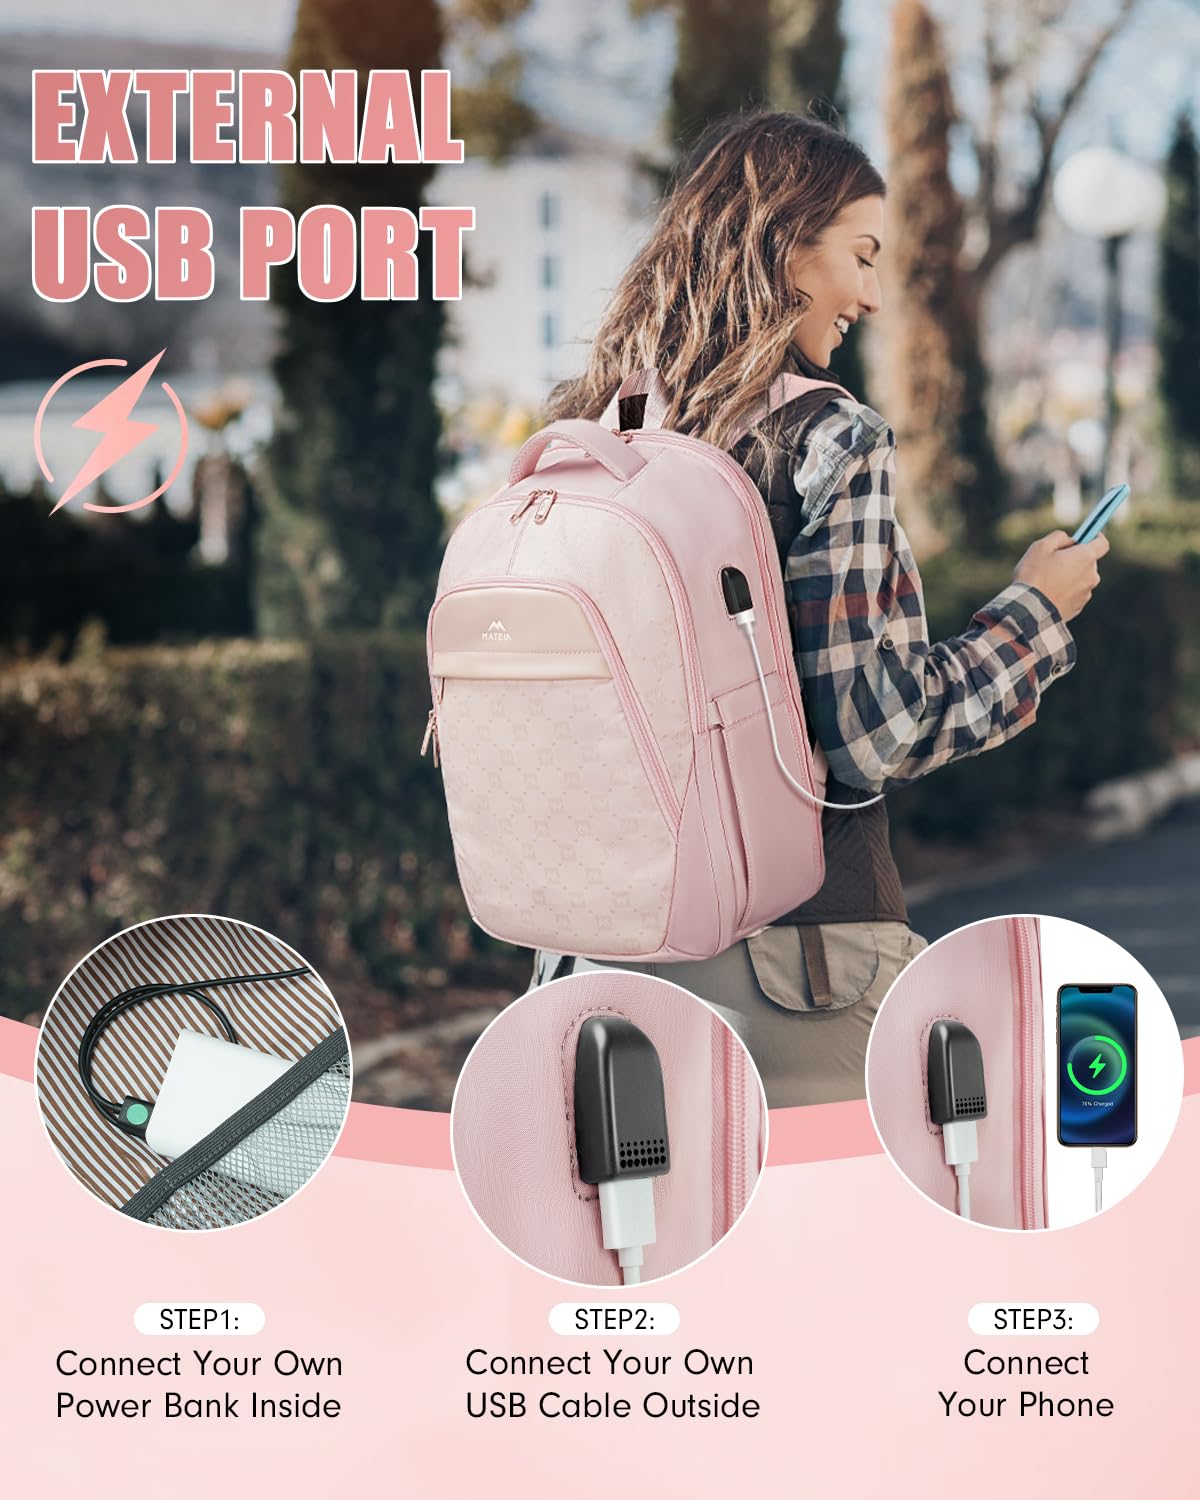 MATEIN Travel Laptop Backpack, Lightweight Anti Theft School Backpack with USB Charging Port, Water Resistant 15.6 Inch Computer Bag, Pink Backpack for Women, Anti Theft 17 Inch Laptop Backpack